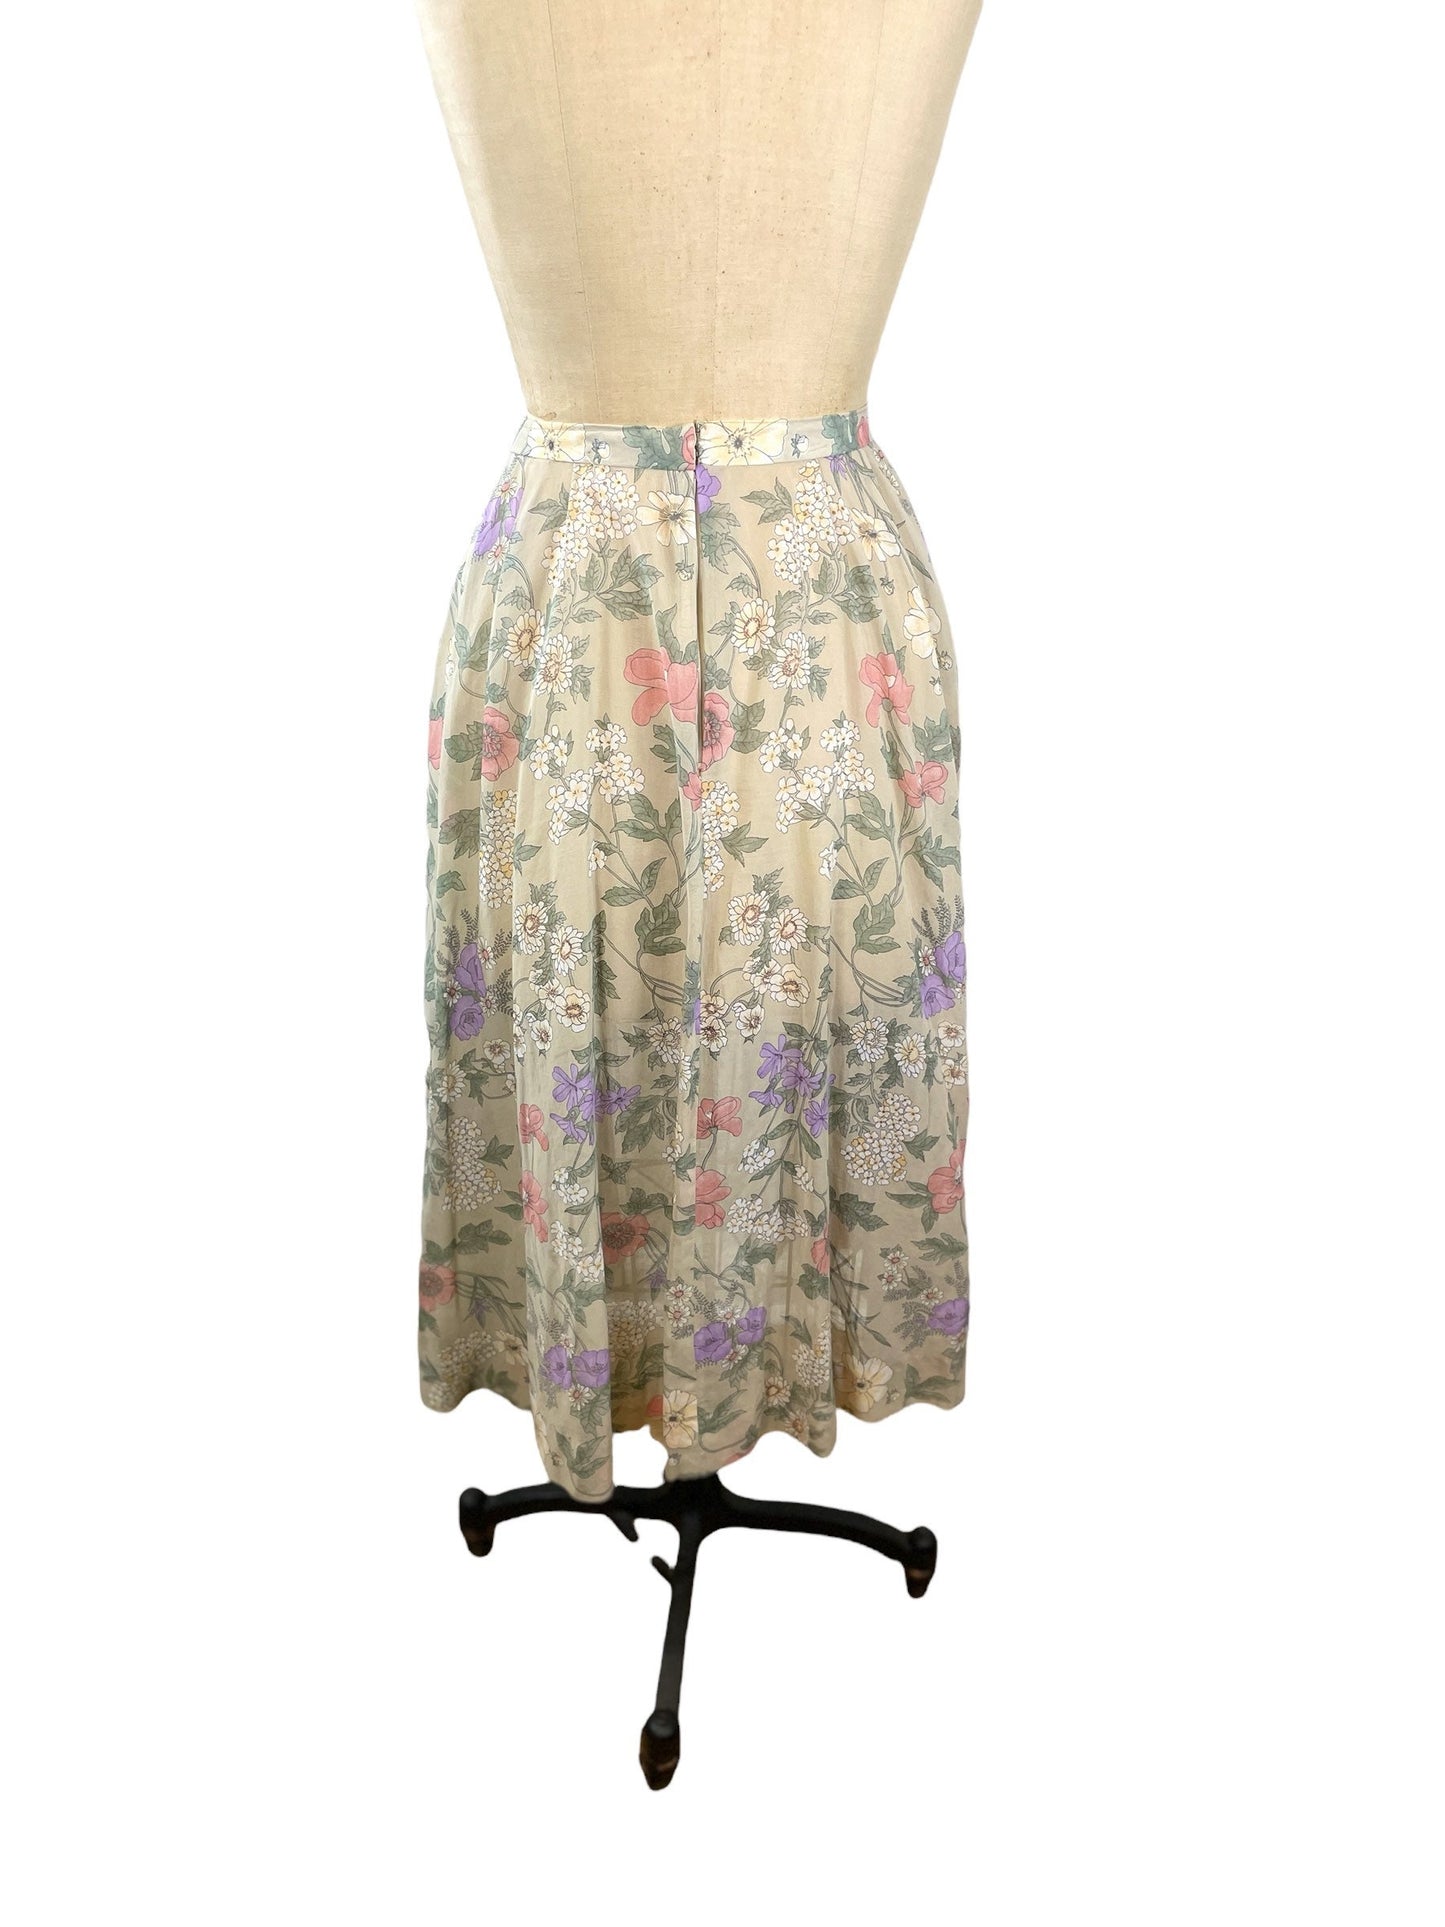 1980s 90s floral skirt pleated flowing semi-sheer Size M